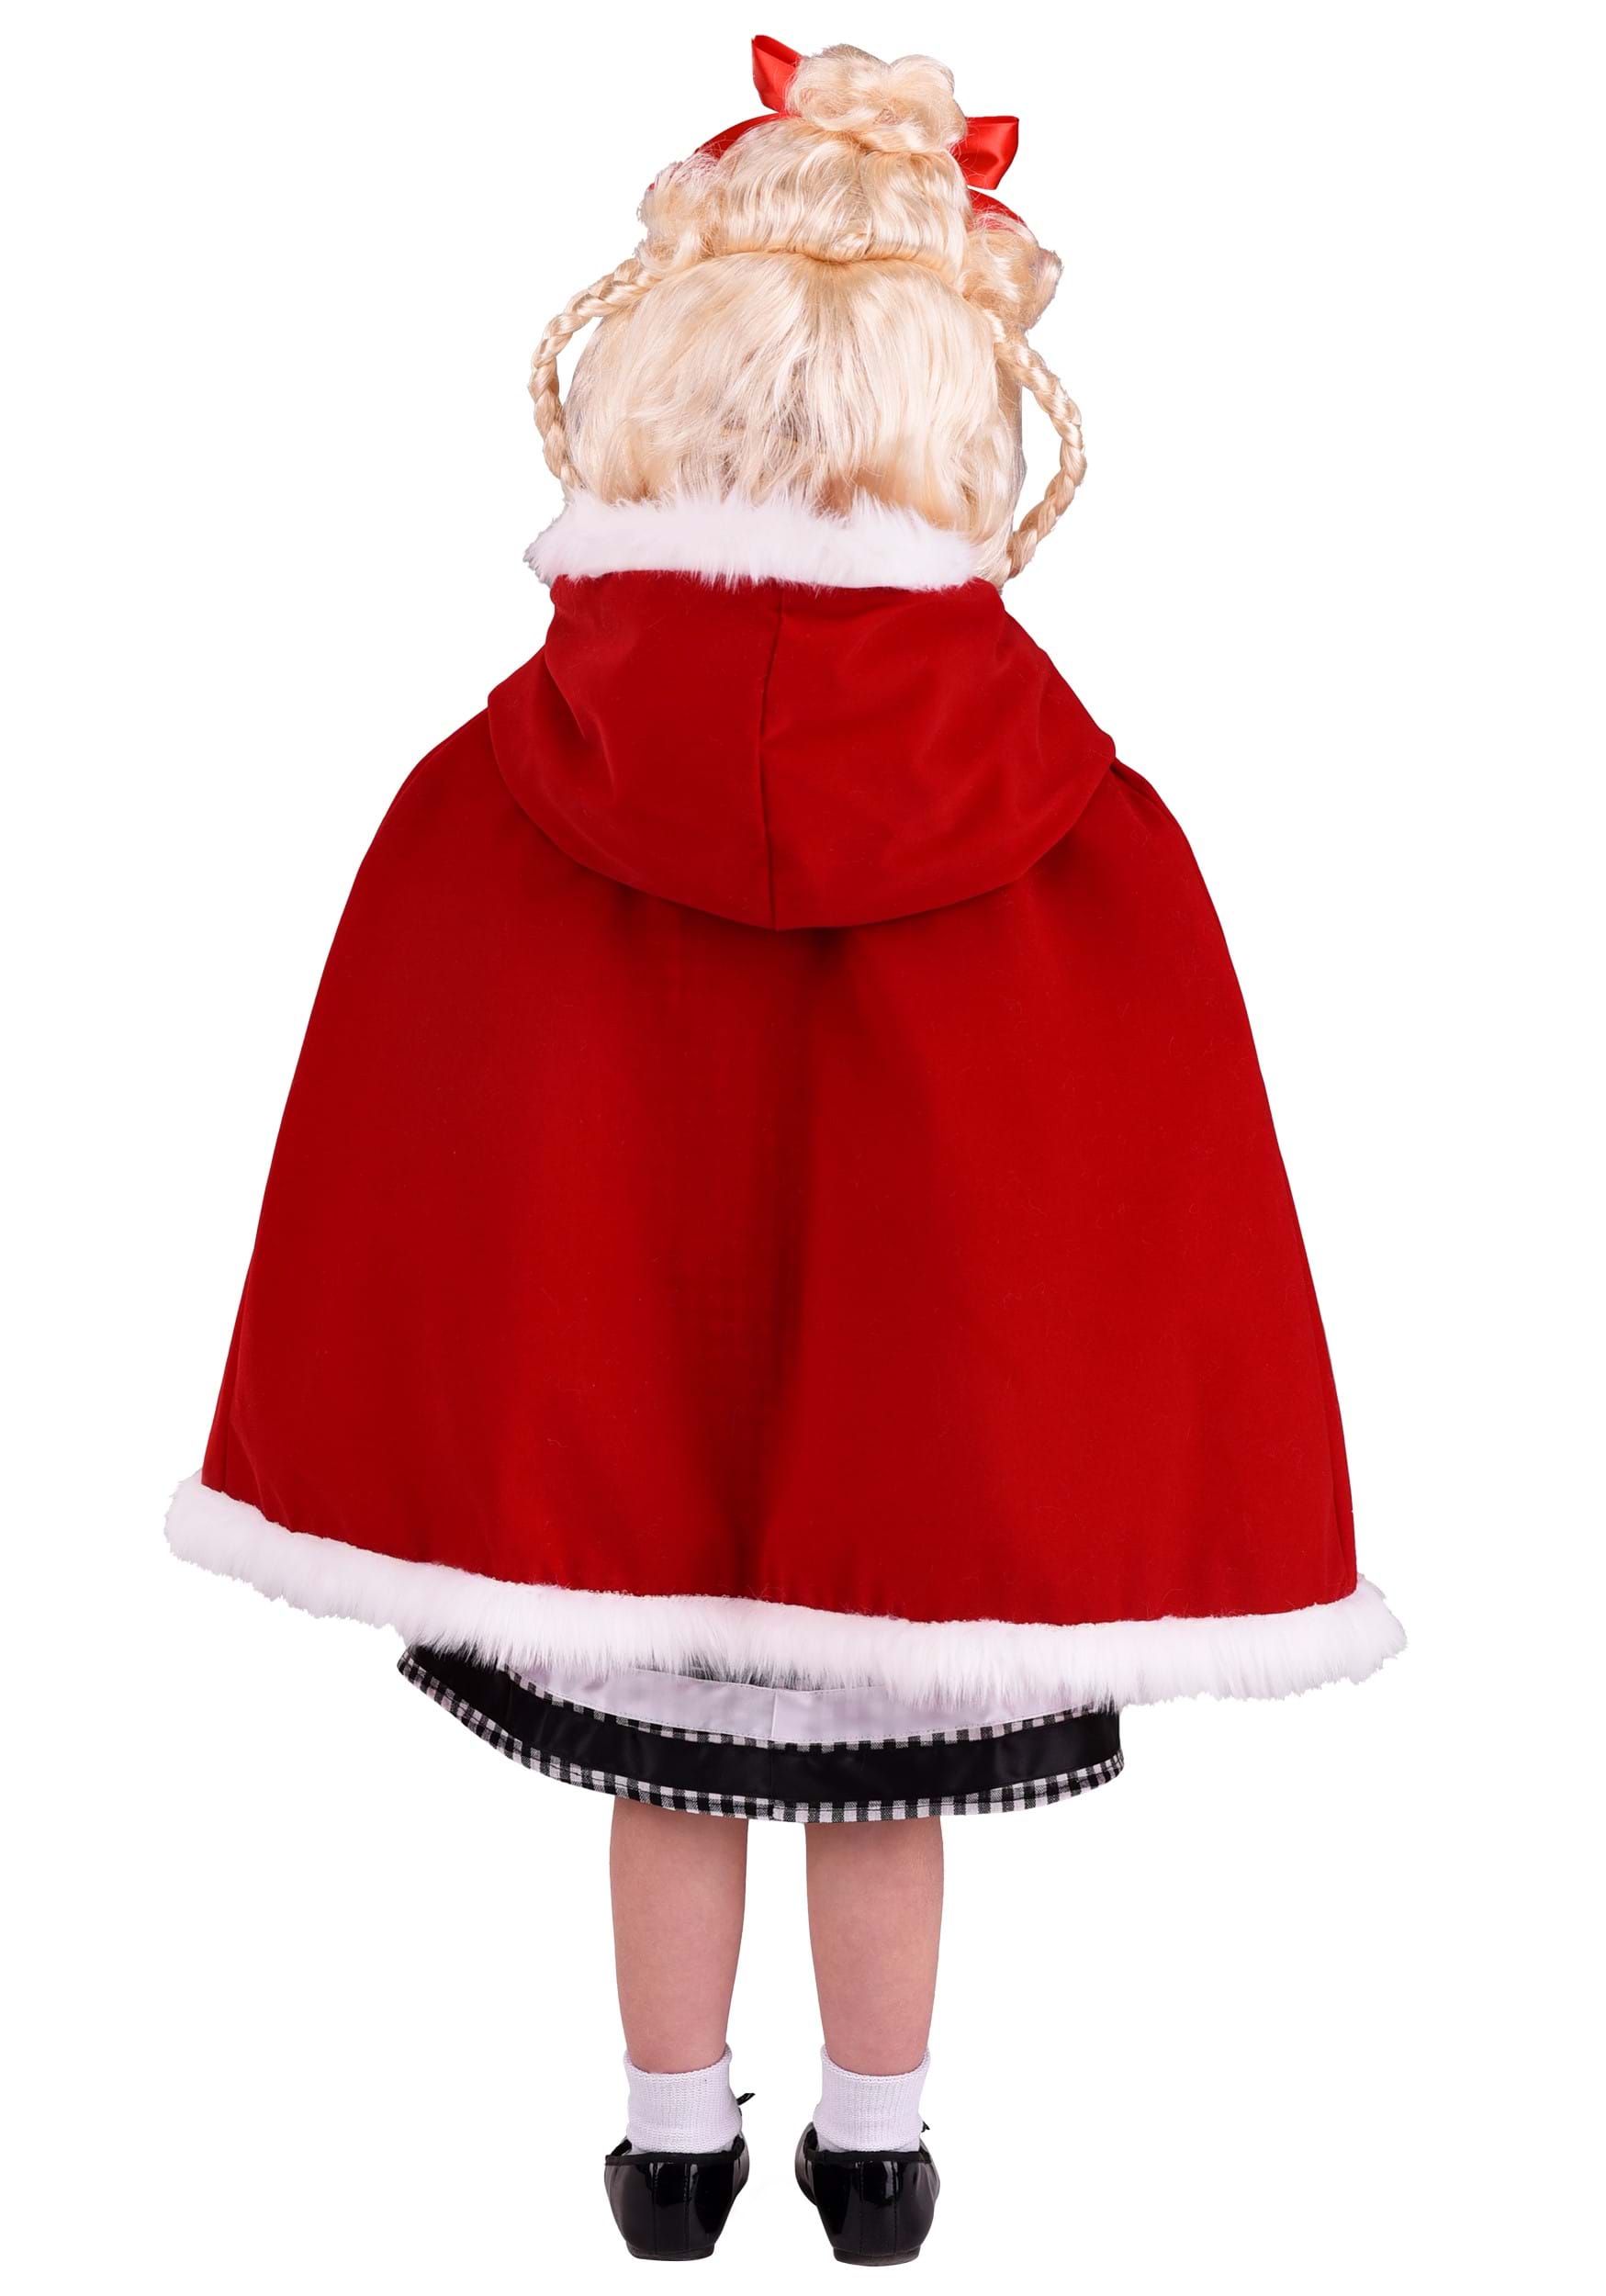 Dr. Seuss Toddler Cindy Lou Who Dress Costume , How The Grinch Stole Christmas Costumes